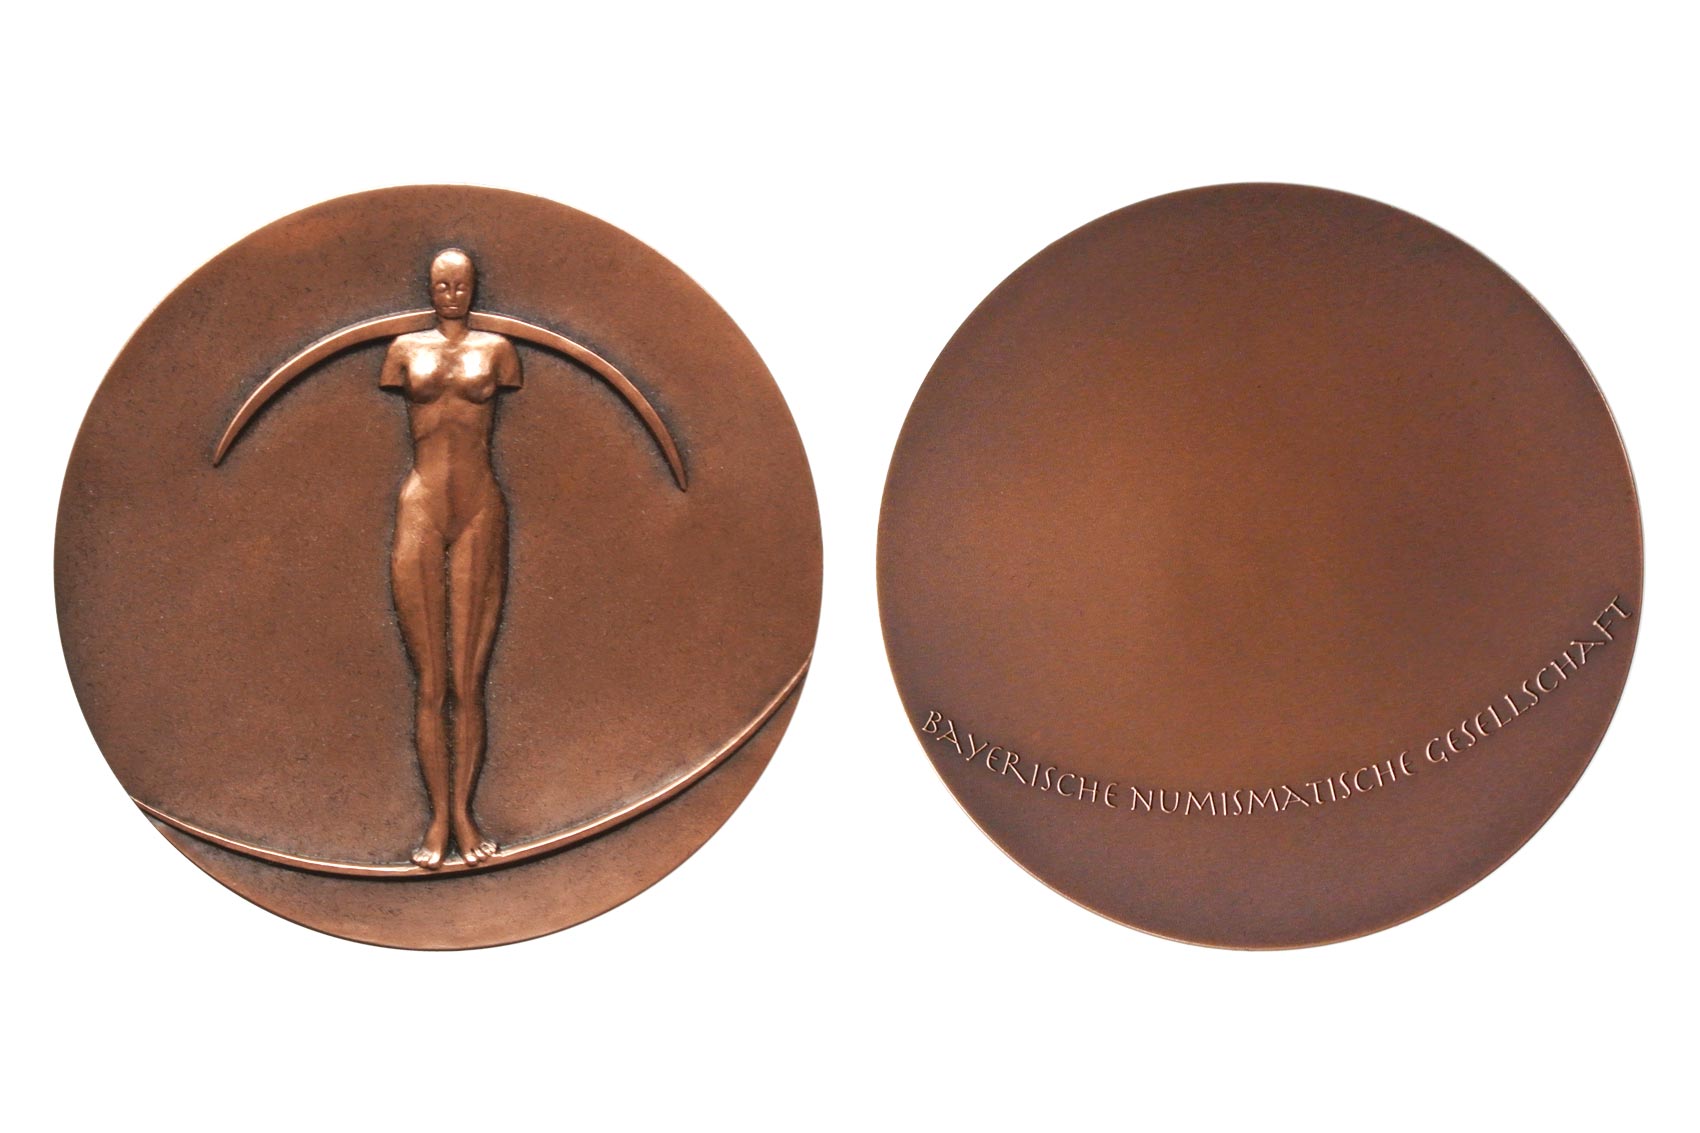 Medal Bavarian Numesmatic Society, material bronze